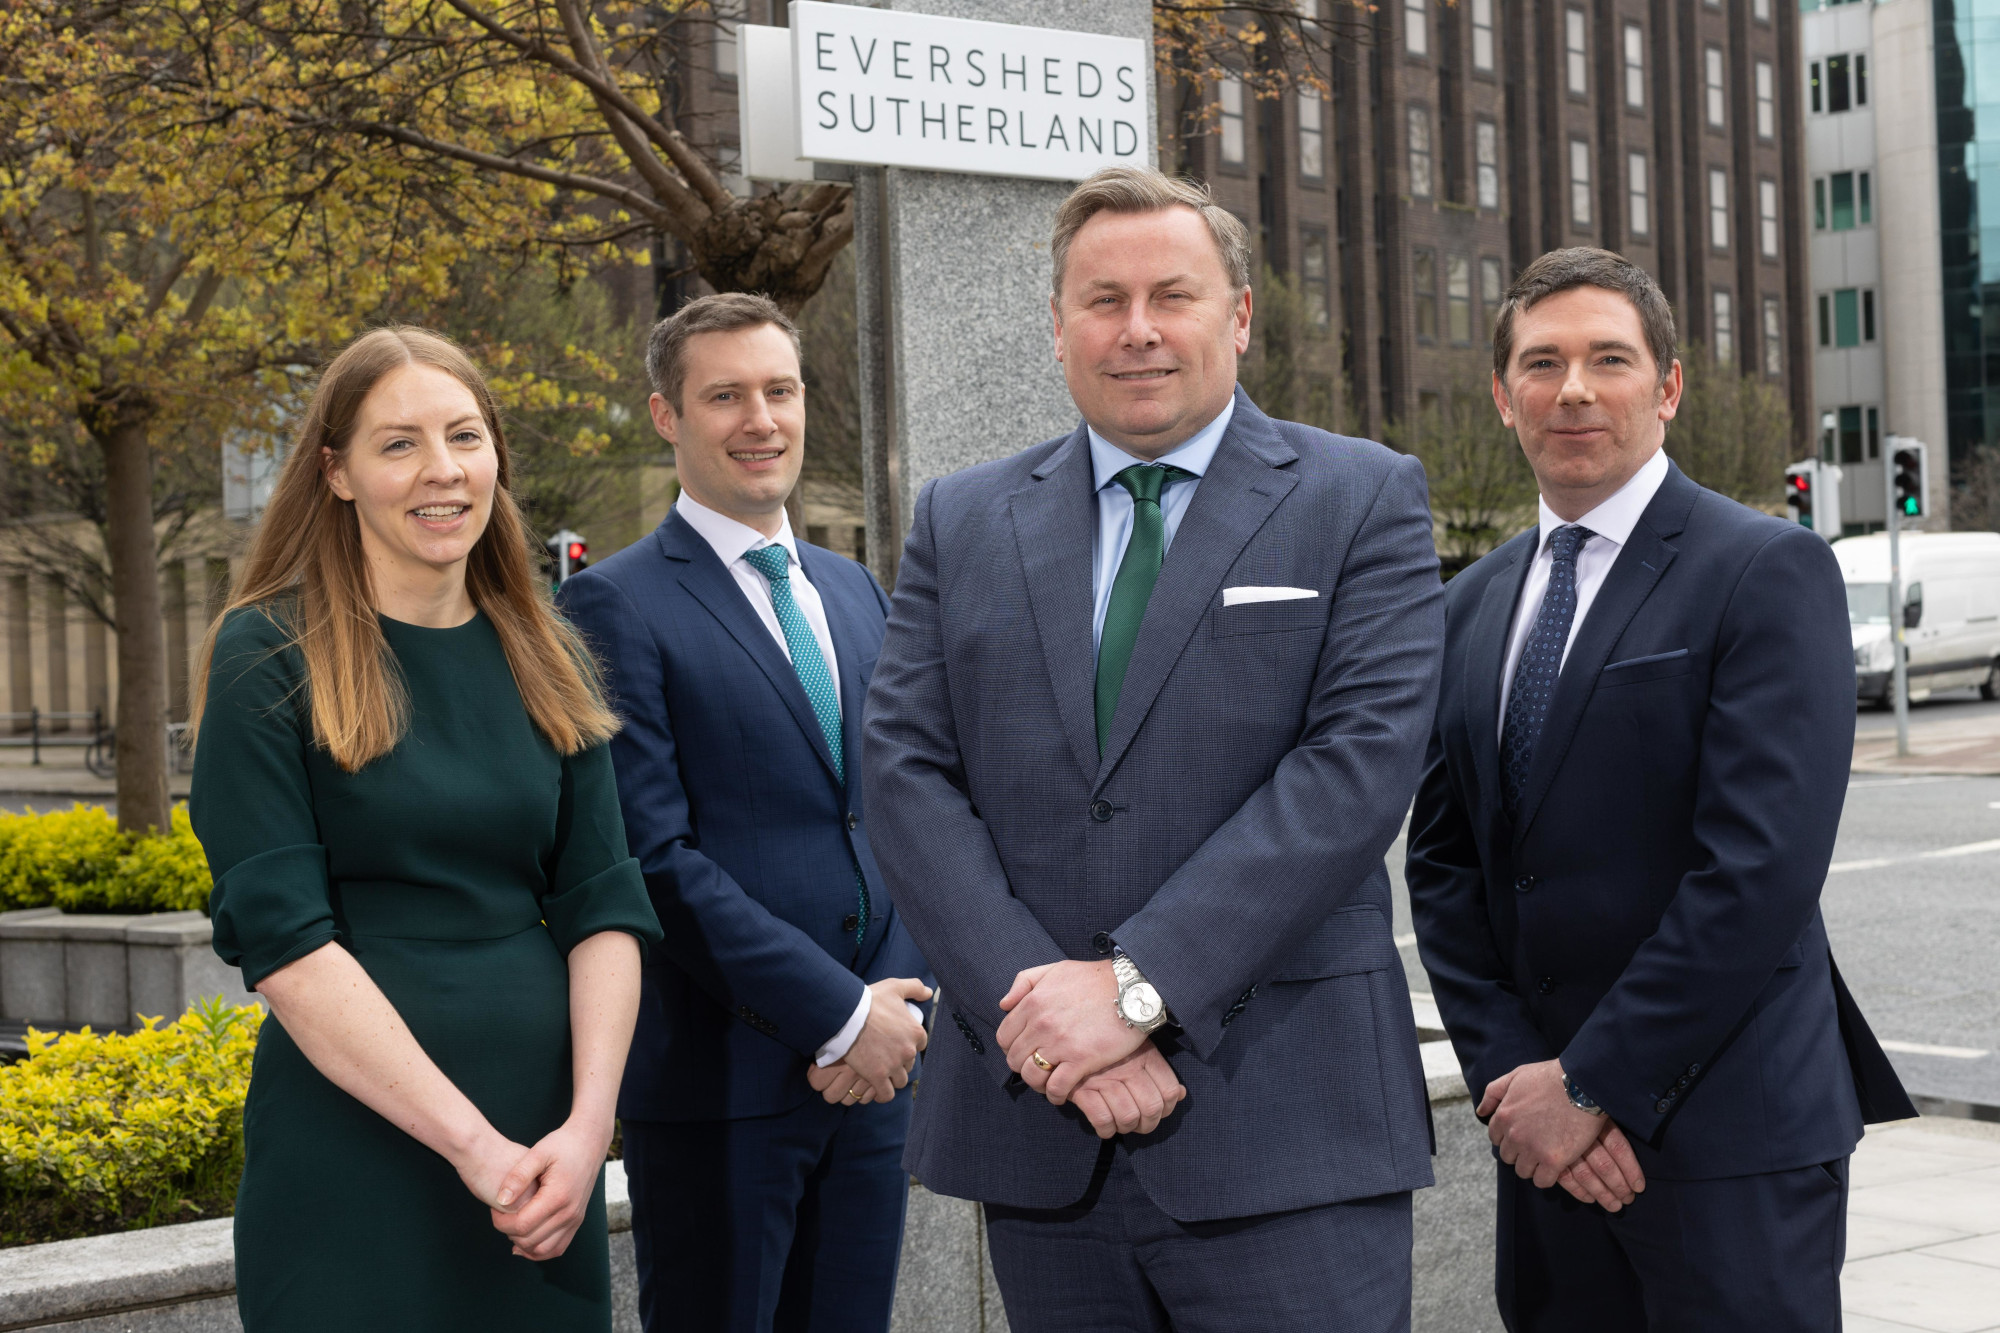 Three new partners among Eversheds Sutherland promotions